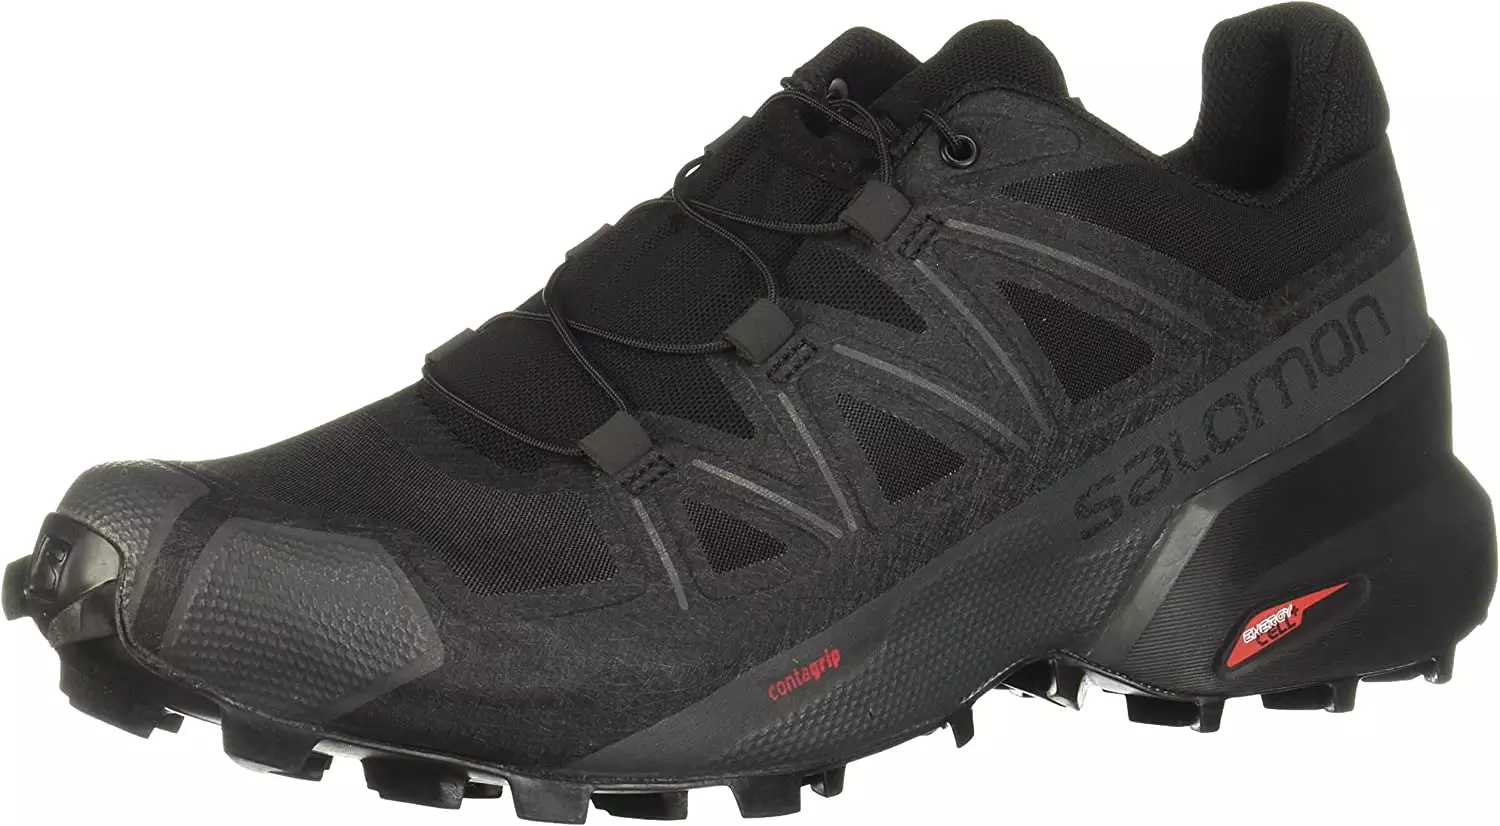 The Salomon Men's Speedcross 5 Trail Running Shoes is a great shoe for golf with its aggressive grip and amazing foothold